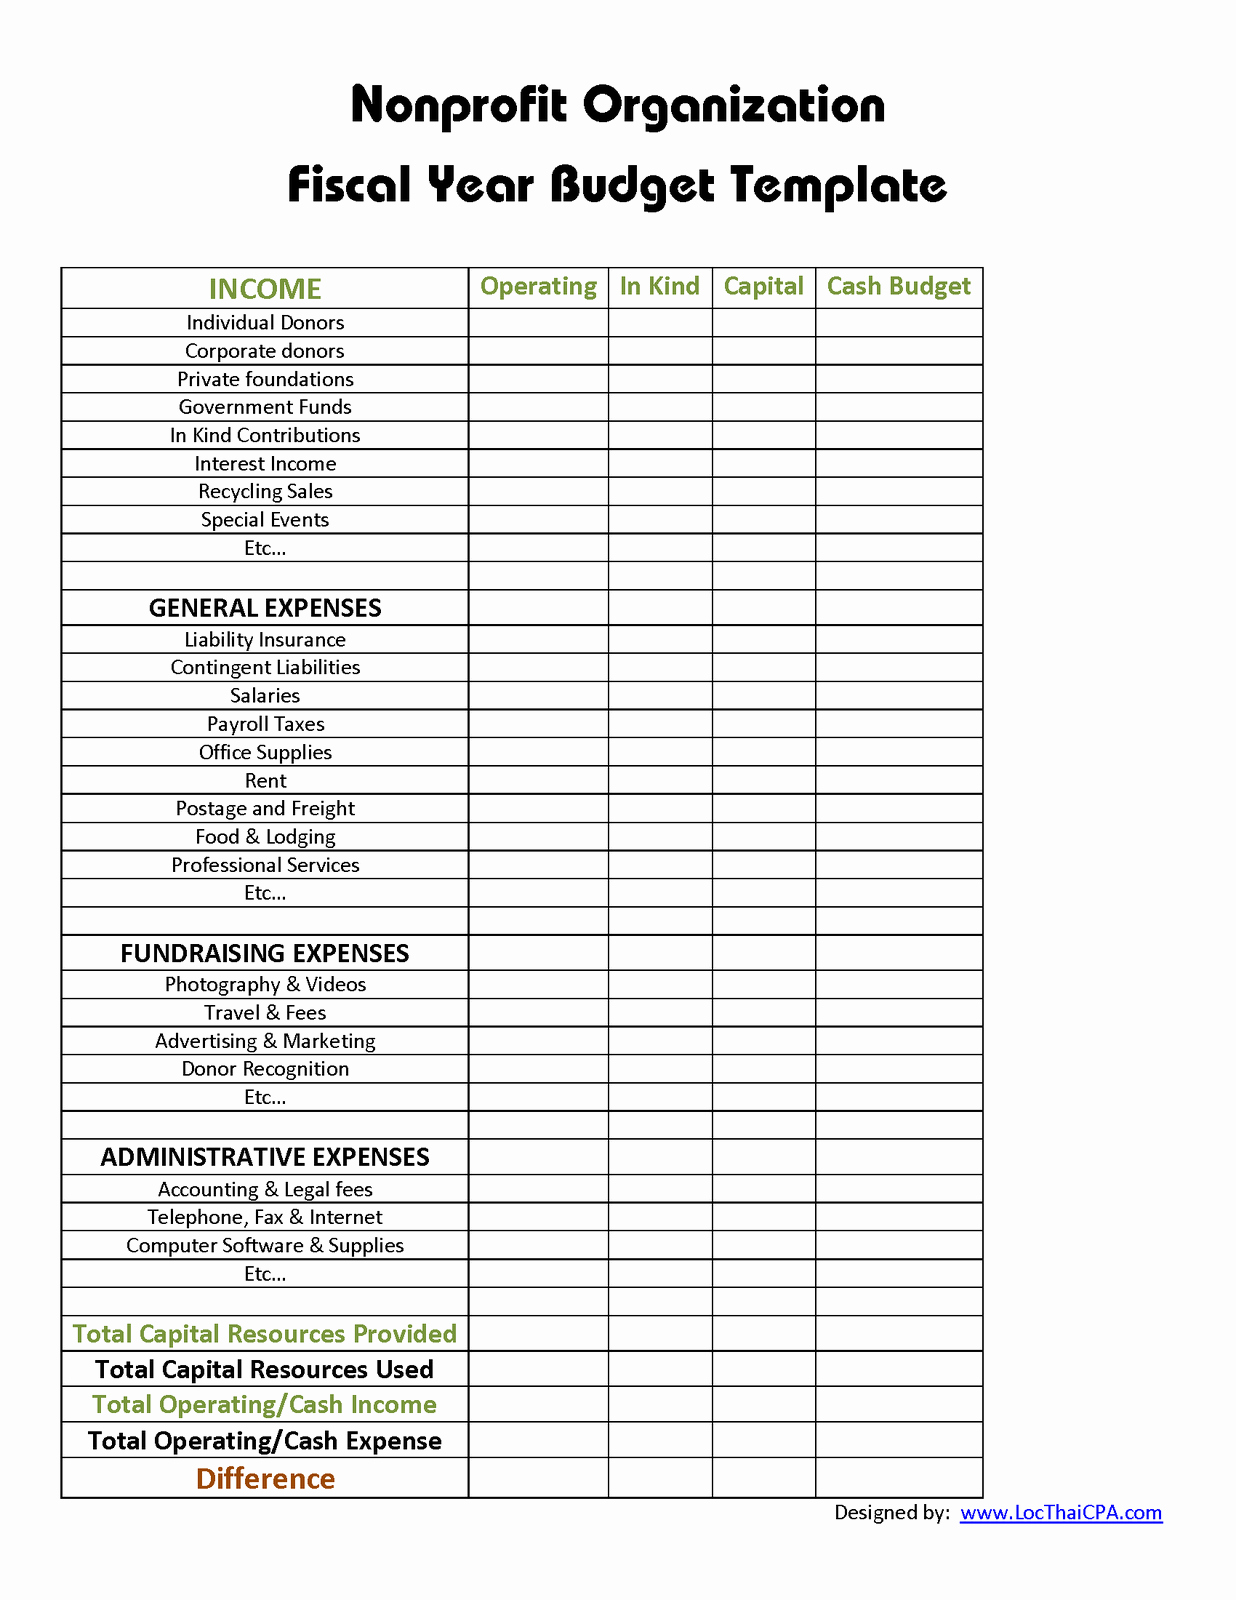 Non Profit Budget Template Lovely Loc Thai Cpa Pc Nonprofit organization Fiscal Year